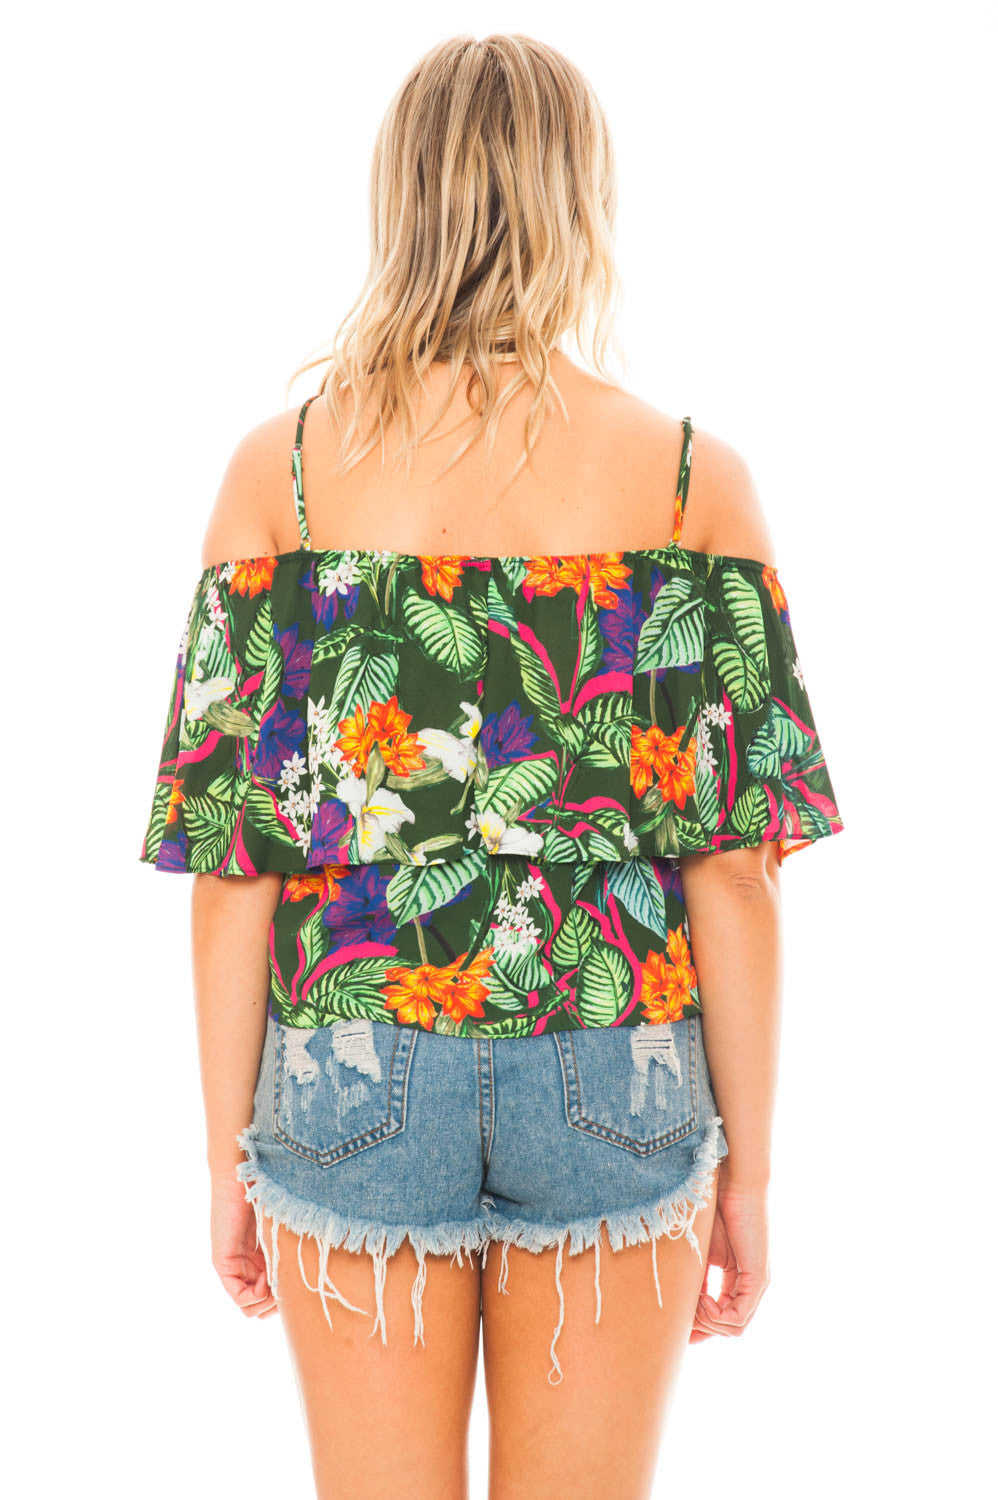 Shirt - Tropical Off Shoulder Top by Everly